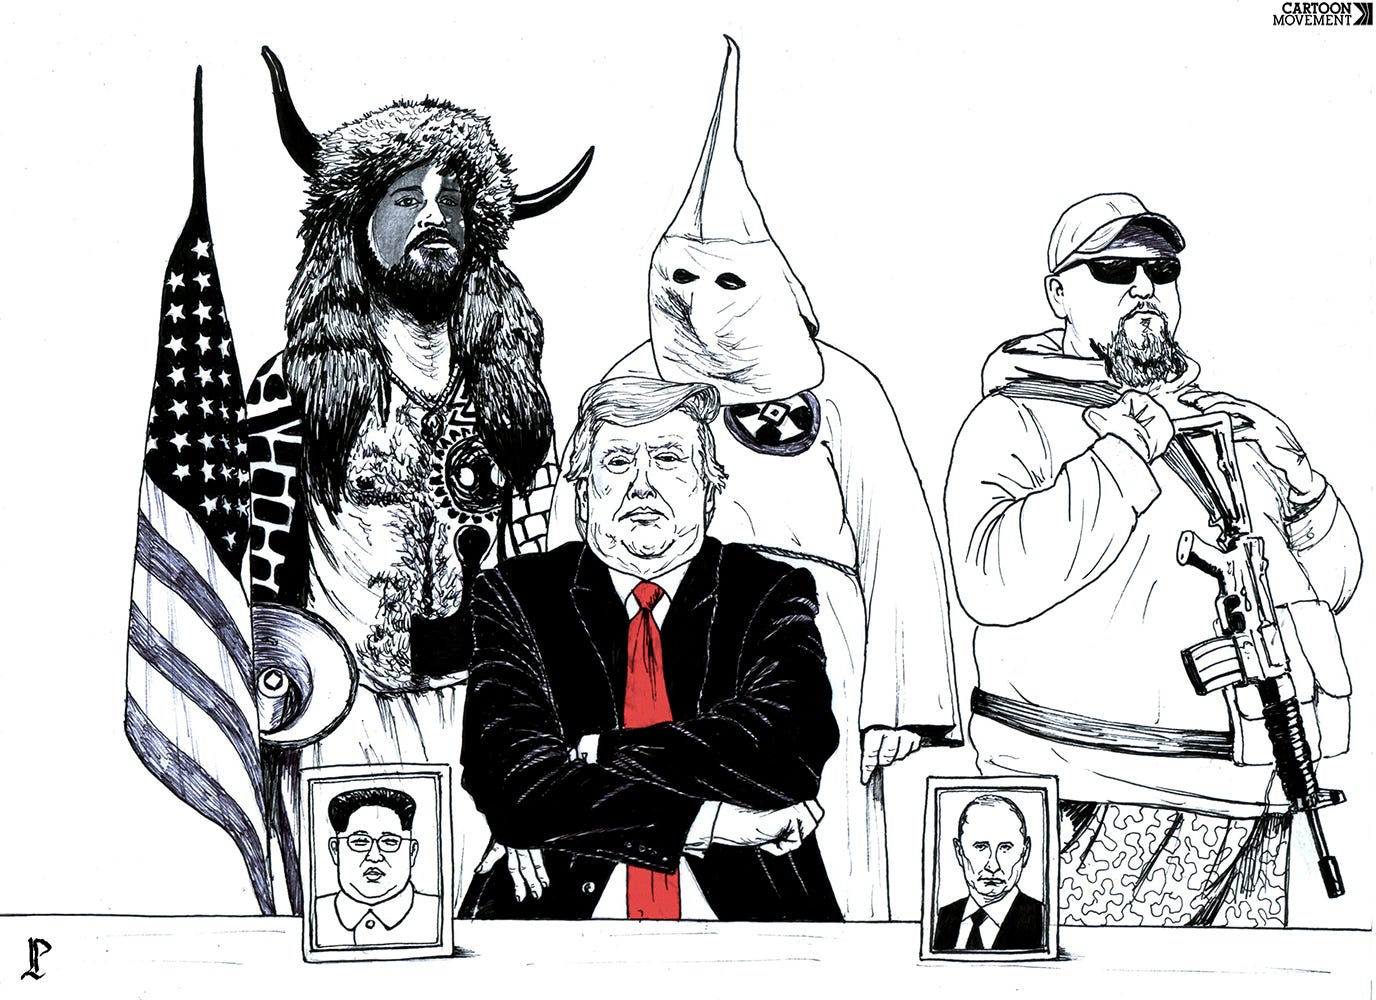 Cartoon showing trump looking triumphant with his arms crossed while he’s flanked by the QAnon Shaman (a leading figure in the Capitol riot), a KKK figure and a white male with a gun. On the desk before him are framed pictures of Putin and Kim Jong-Un.